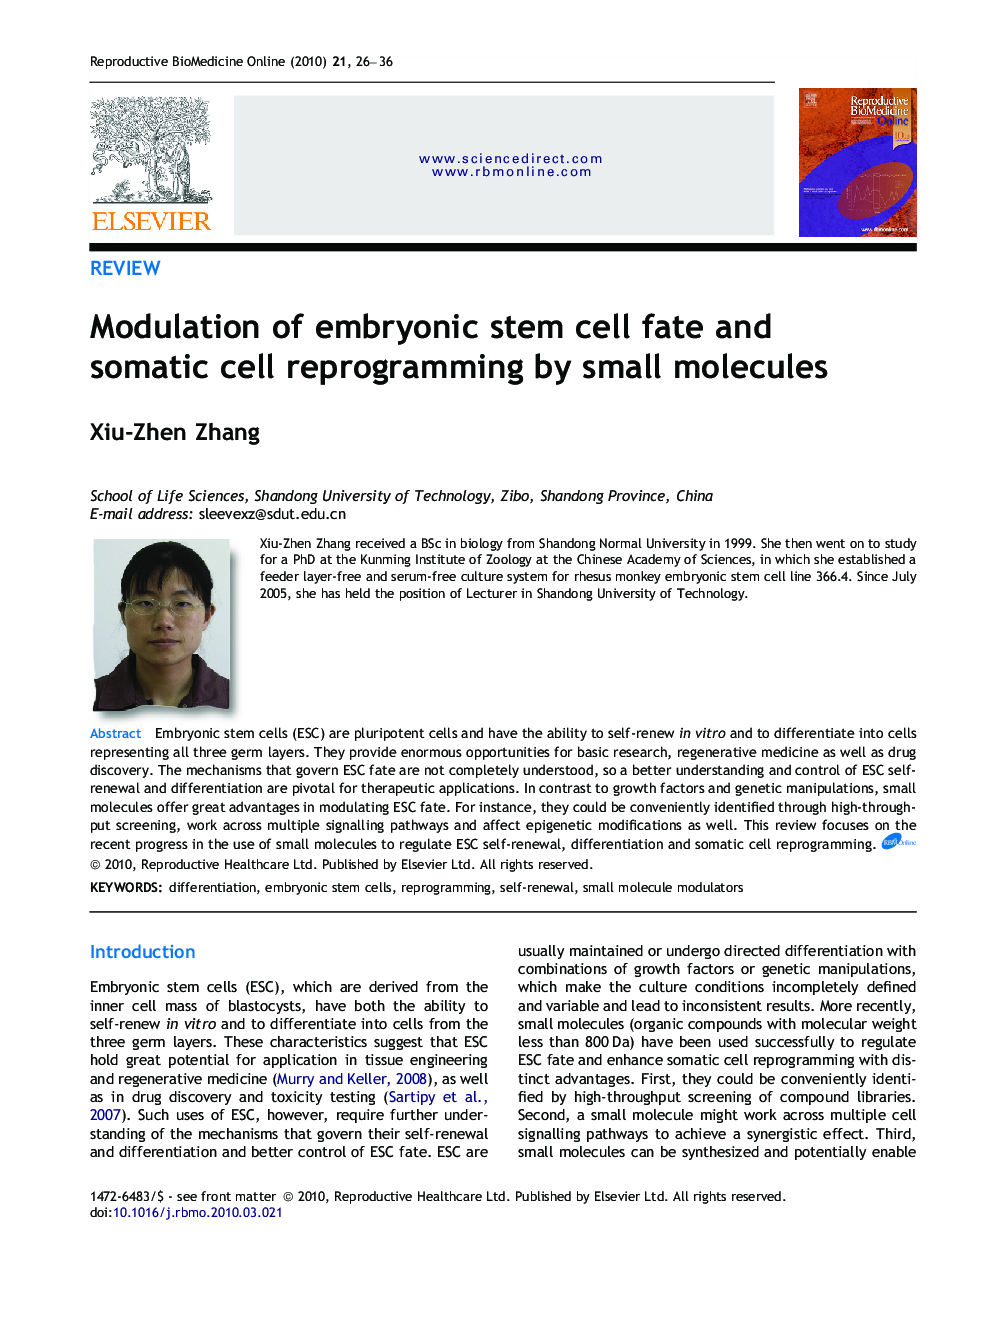 Modulation of embryonic stem cell fate and somatic cell reprogramming by small molecules 